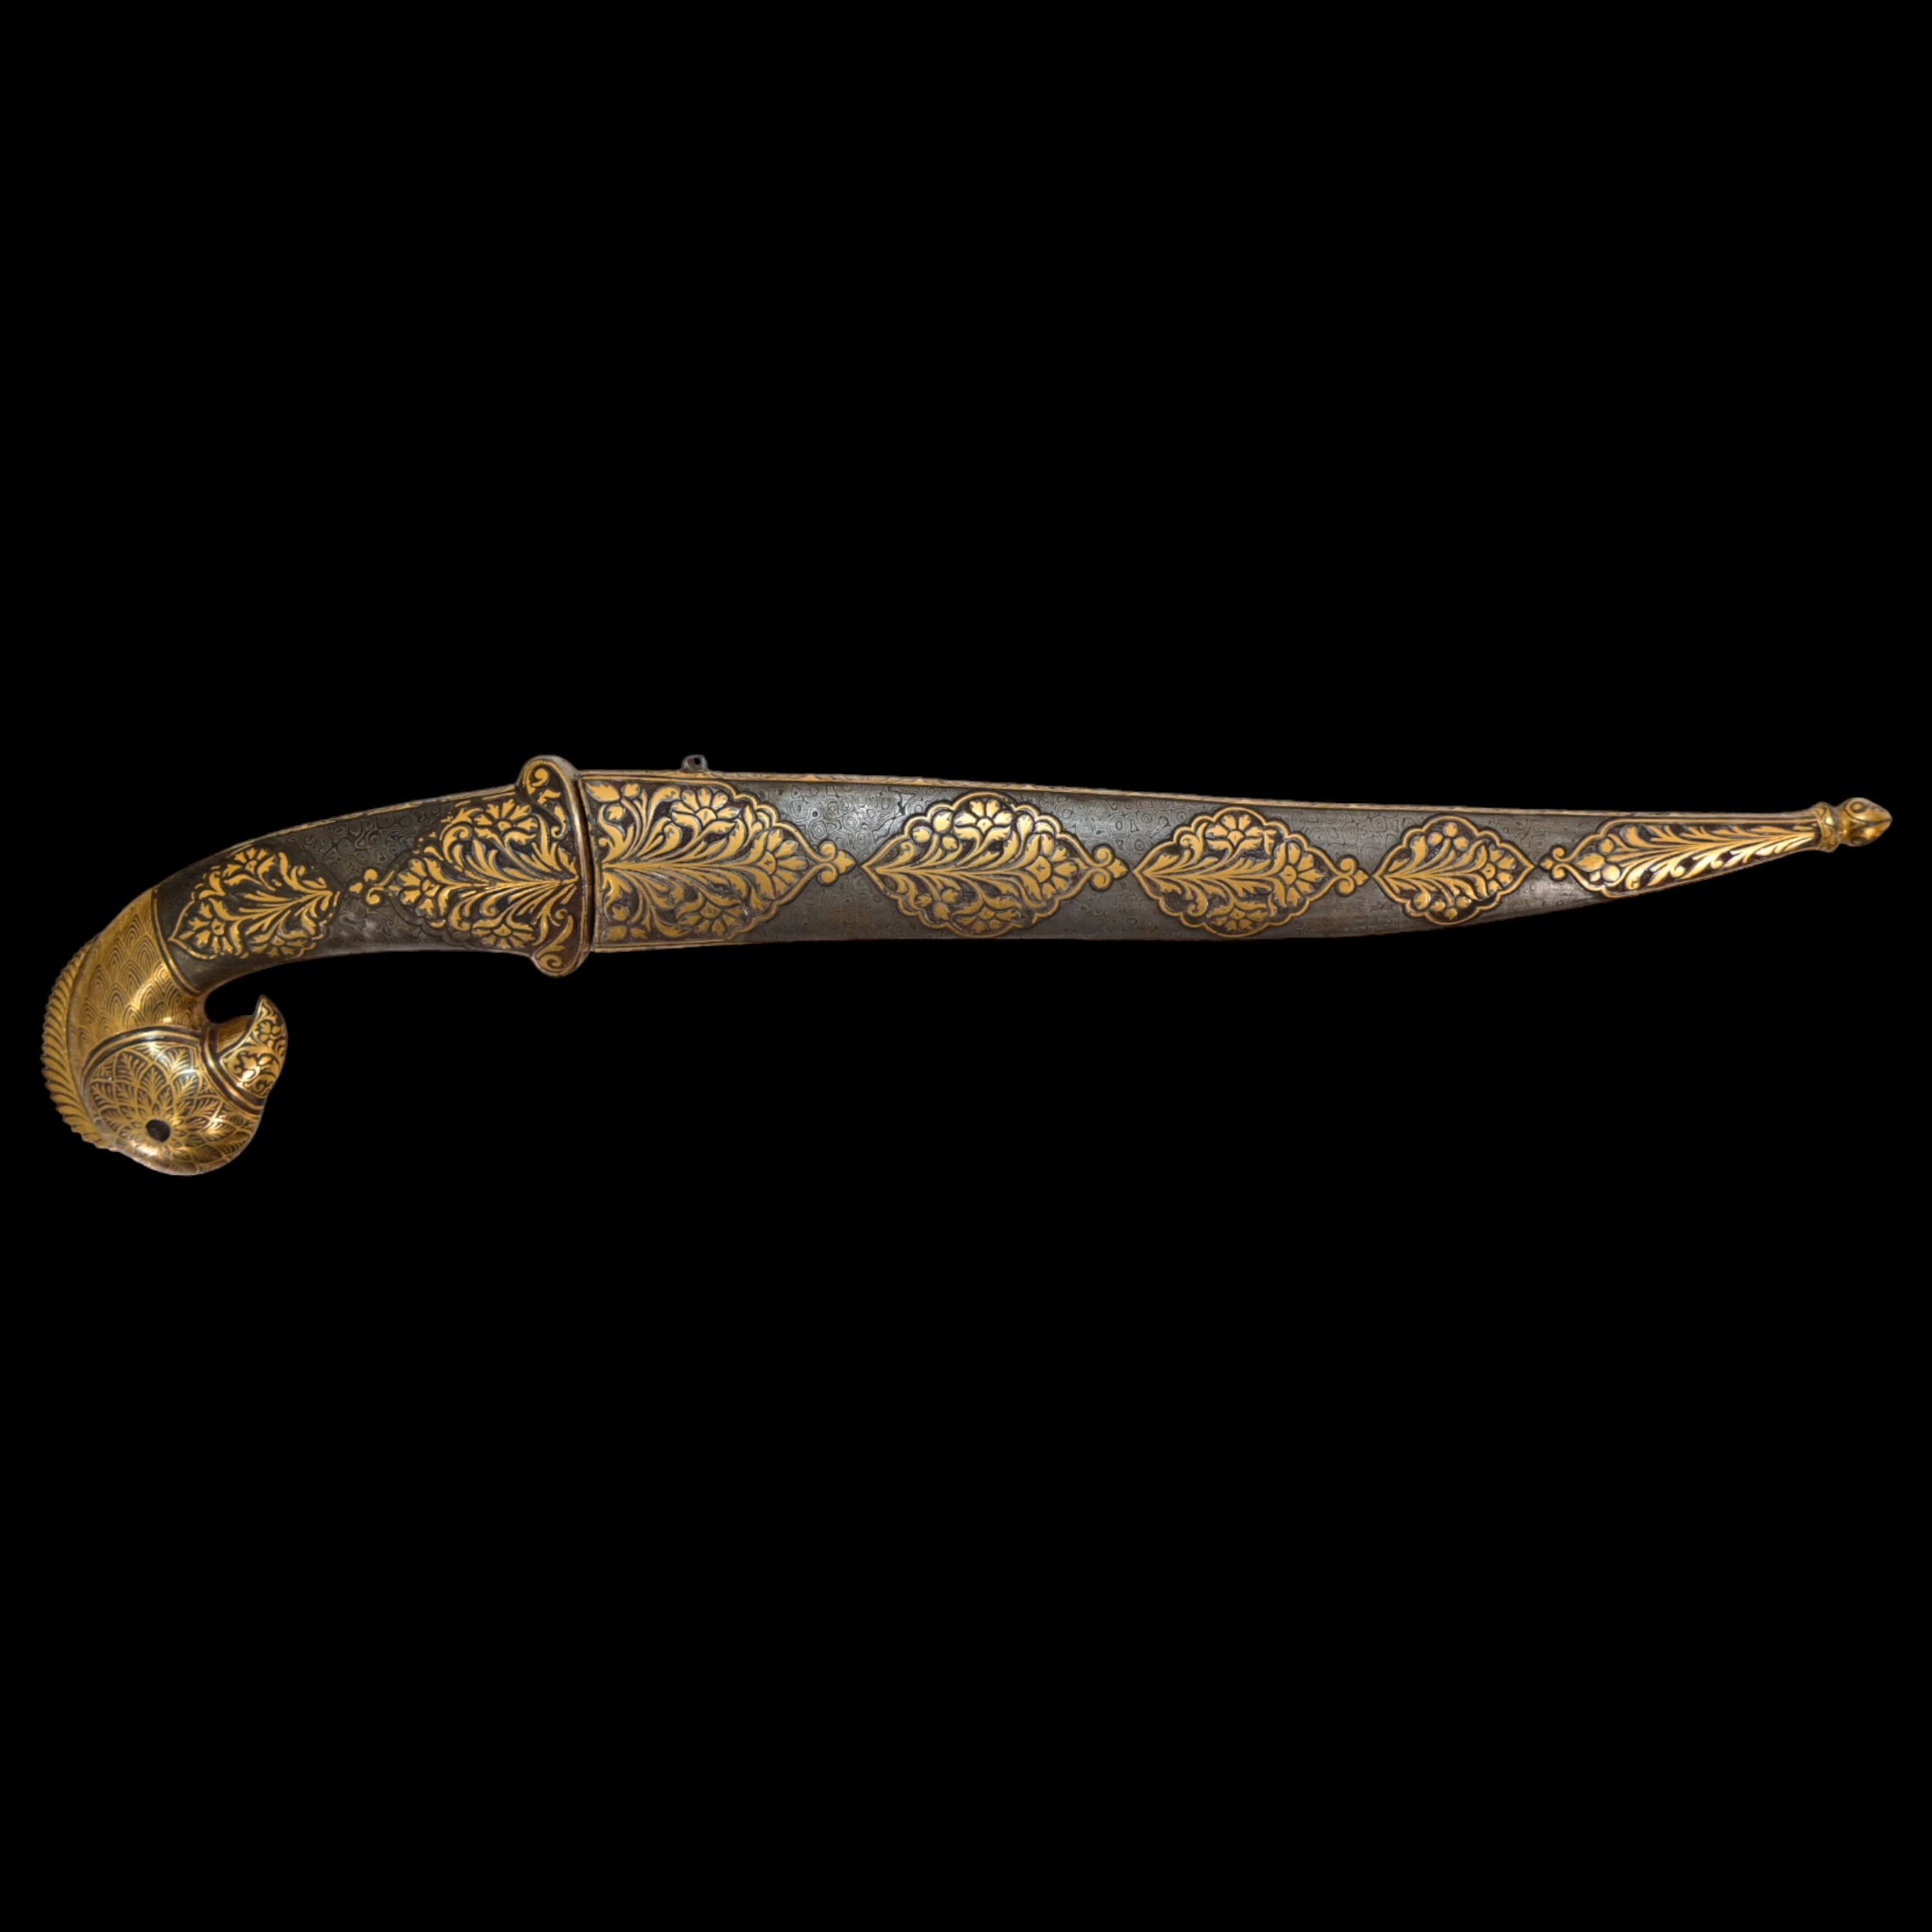 Richly decorated gold kofgari Indian dagger with wootz blade, 19th century. - Image 2 of 12